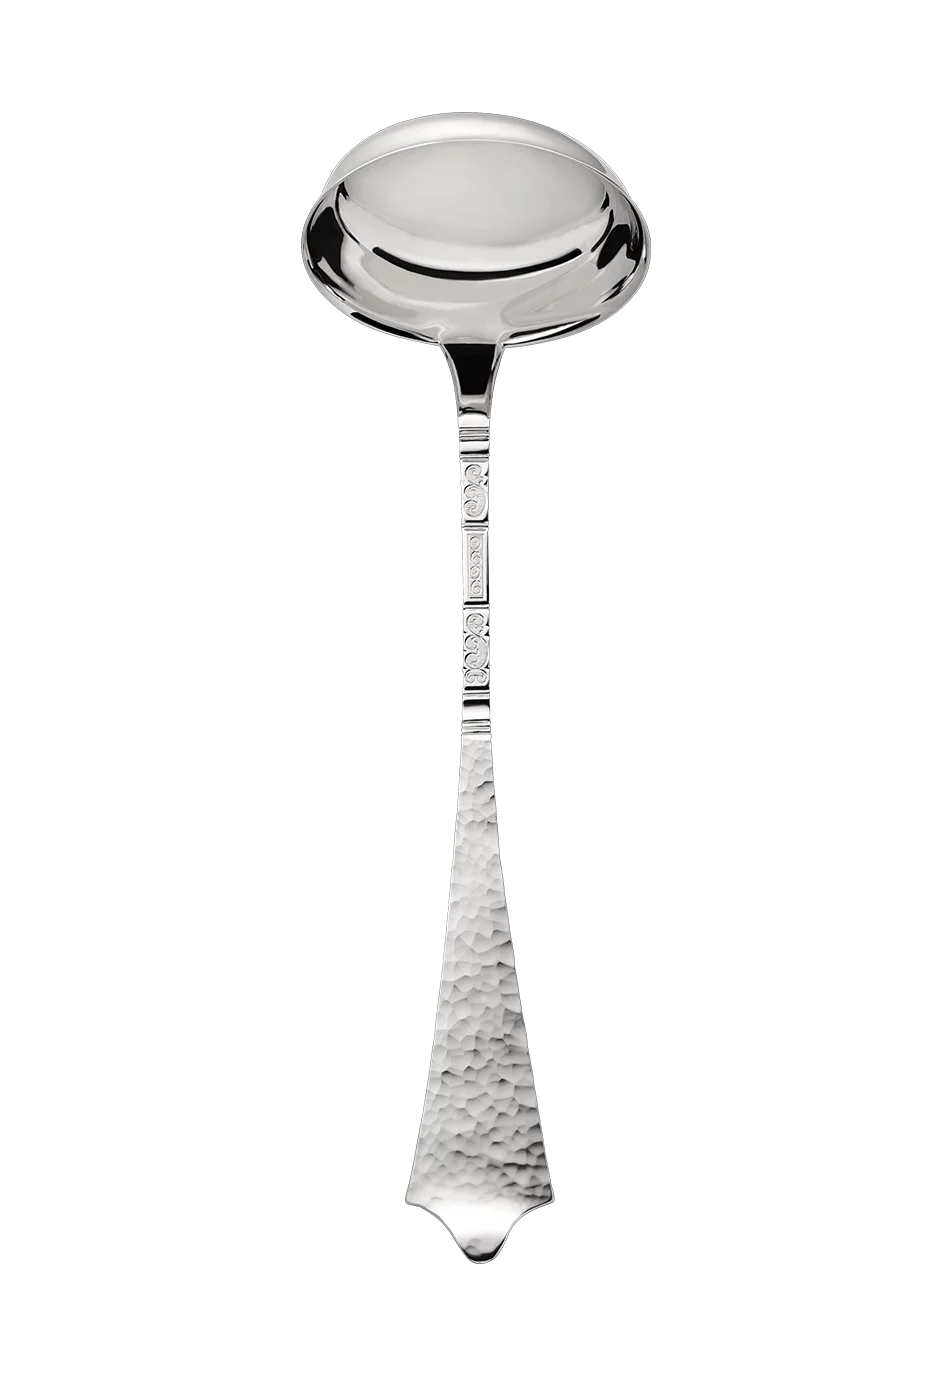 Hermitage Soup Ladle (150g massive silverplated)